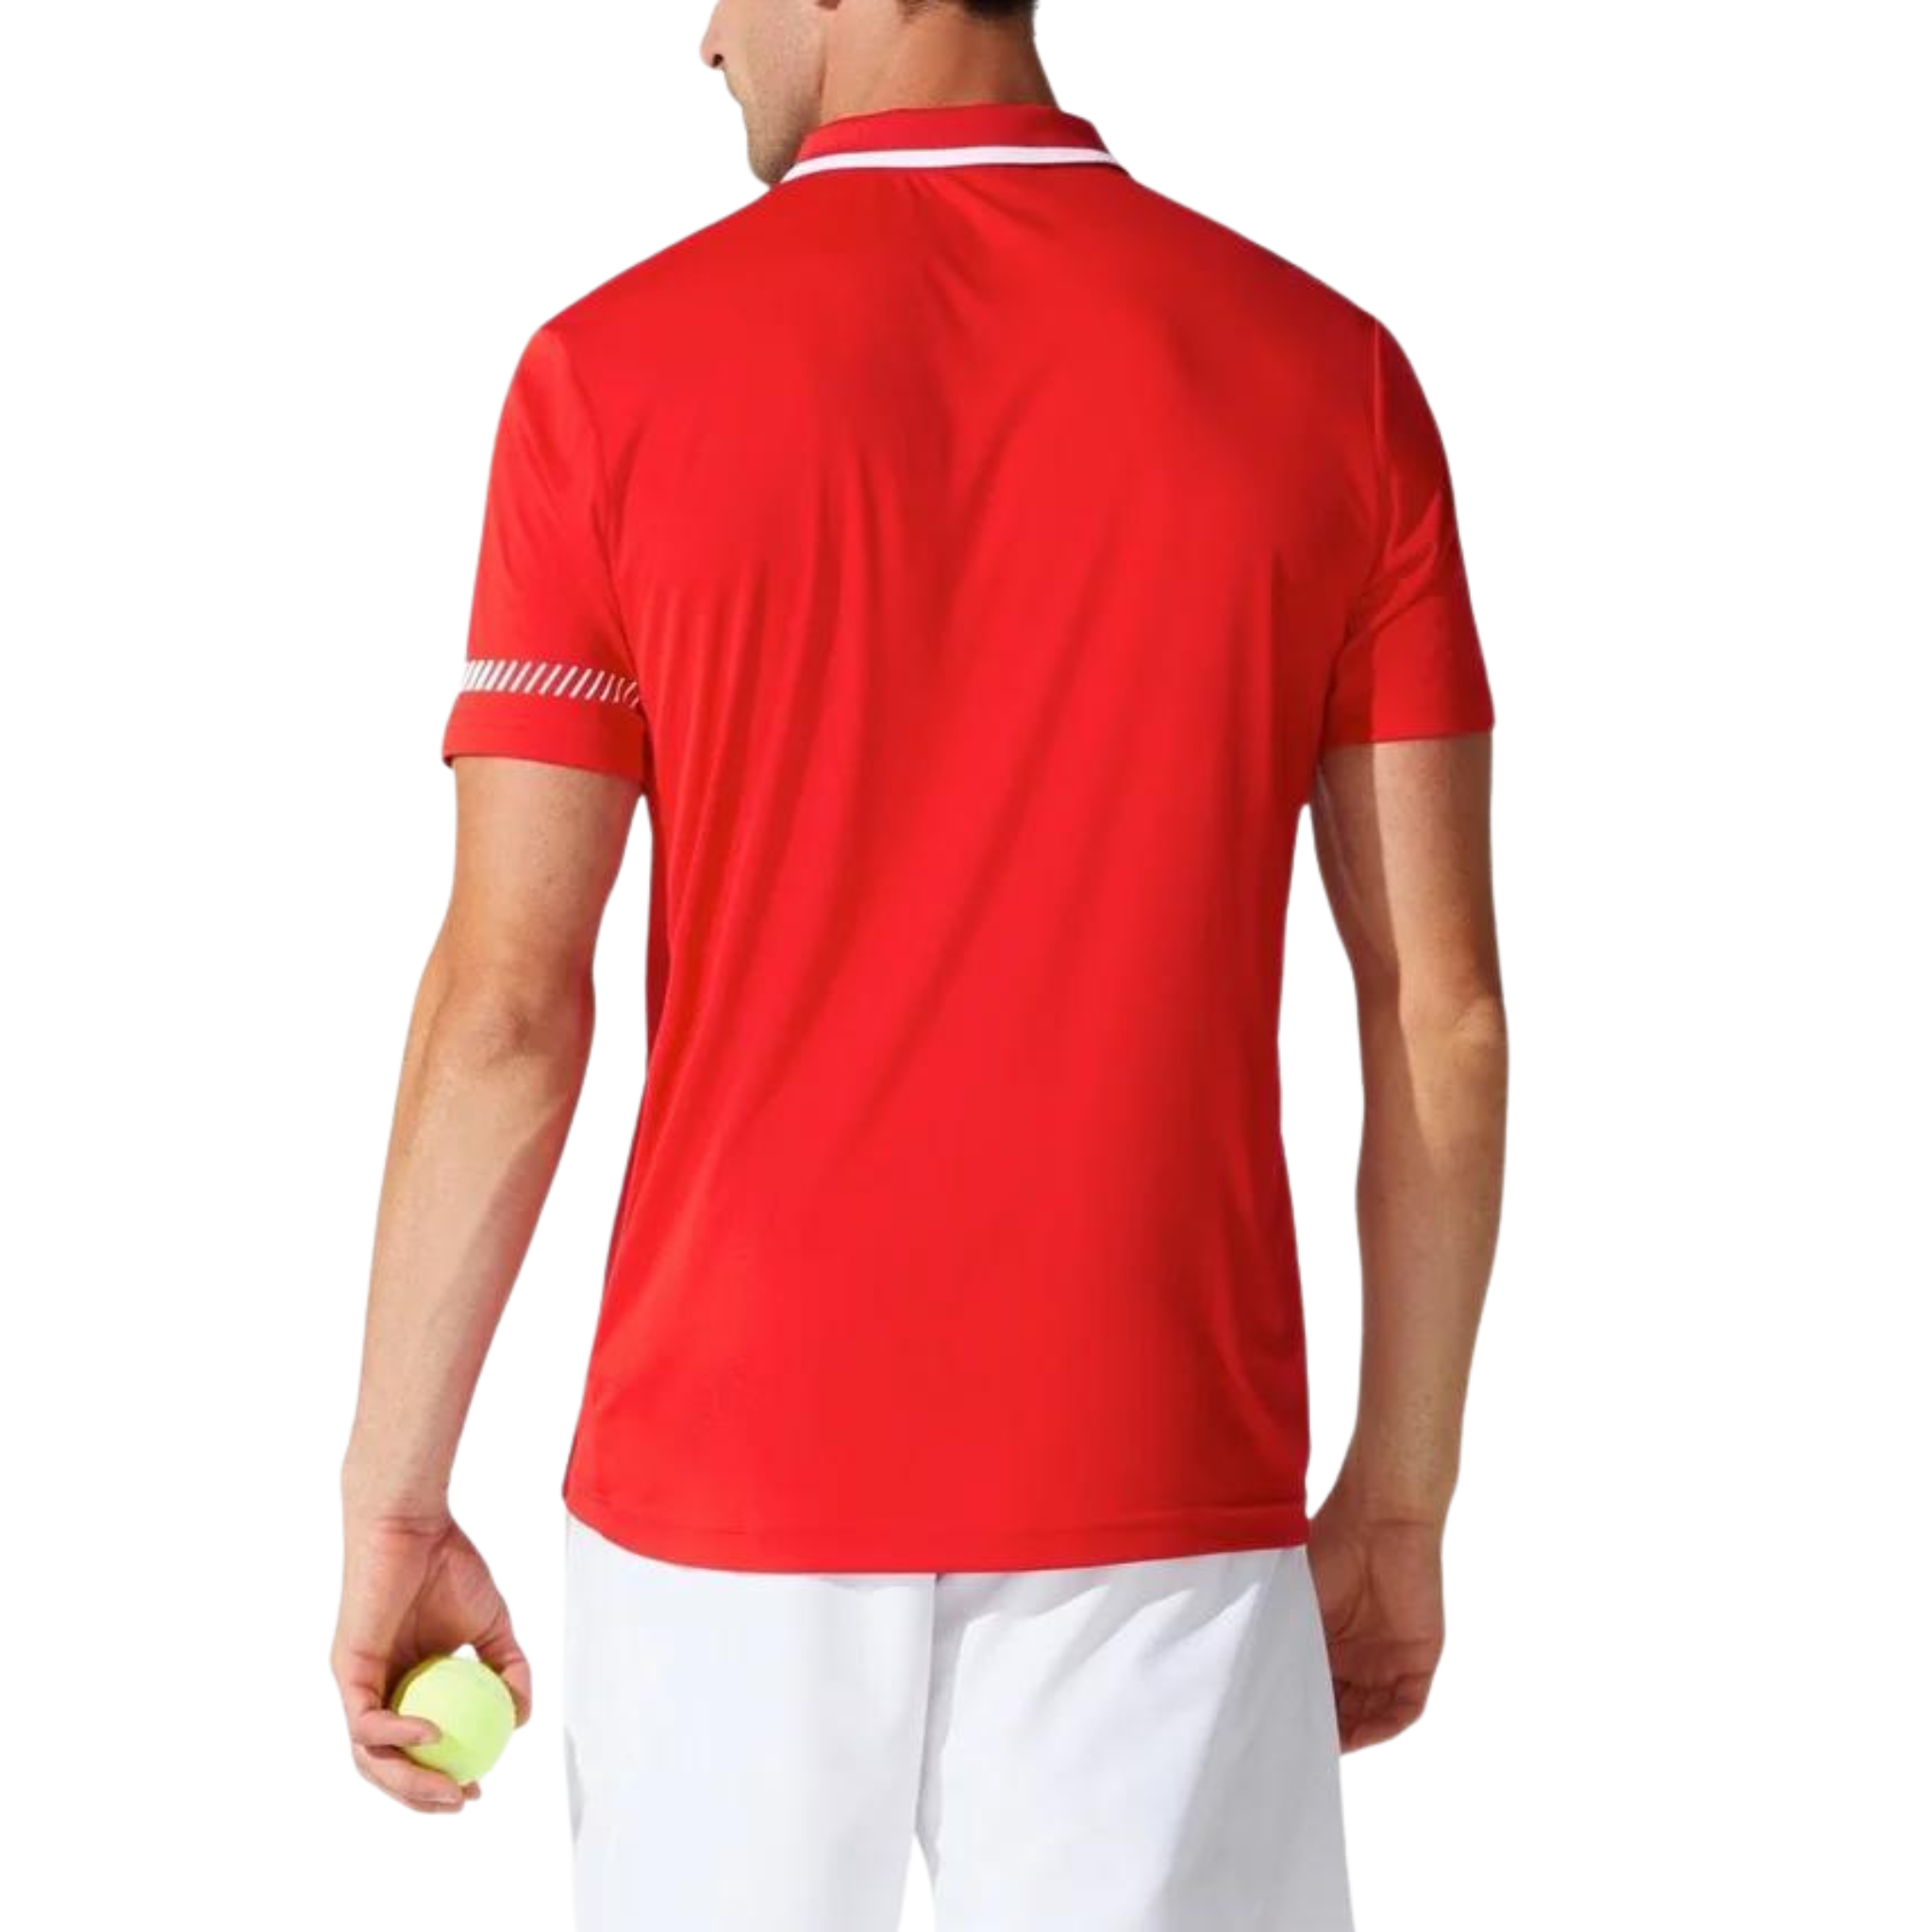 Asics court polo mens - classic red